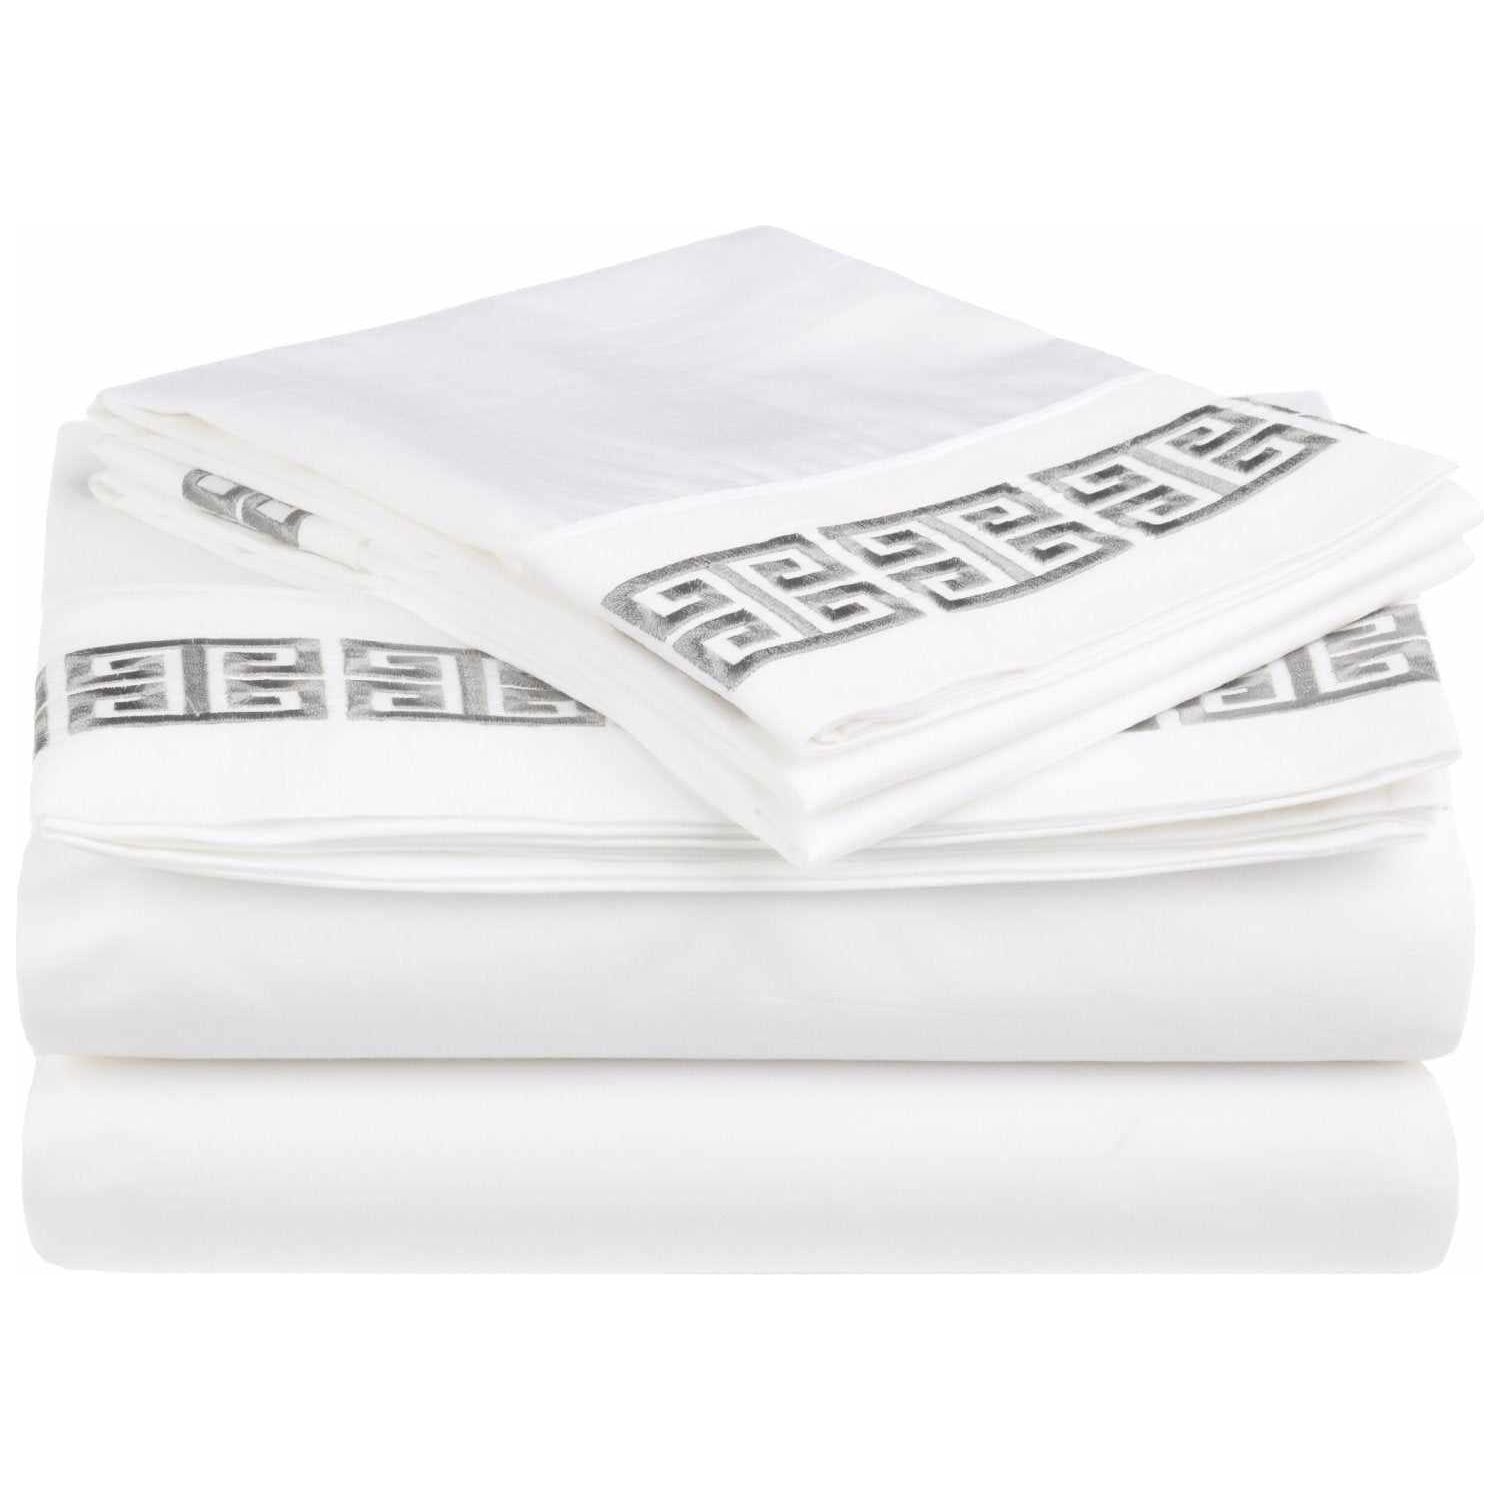 Superior Classic 200 thread Count Kendell Embroidered Cotton Deep Pocket Sheets - White/Grey